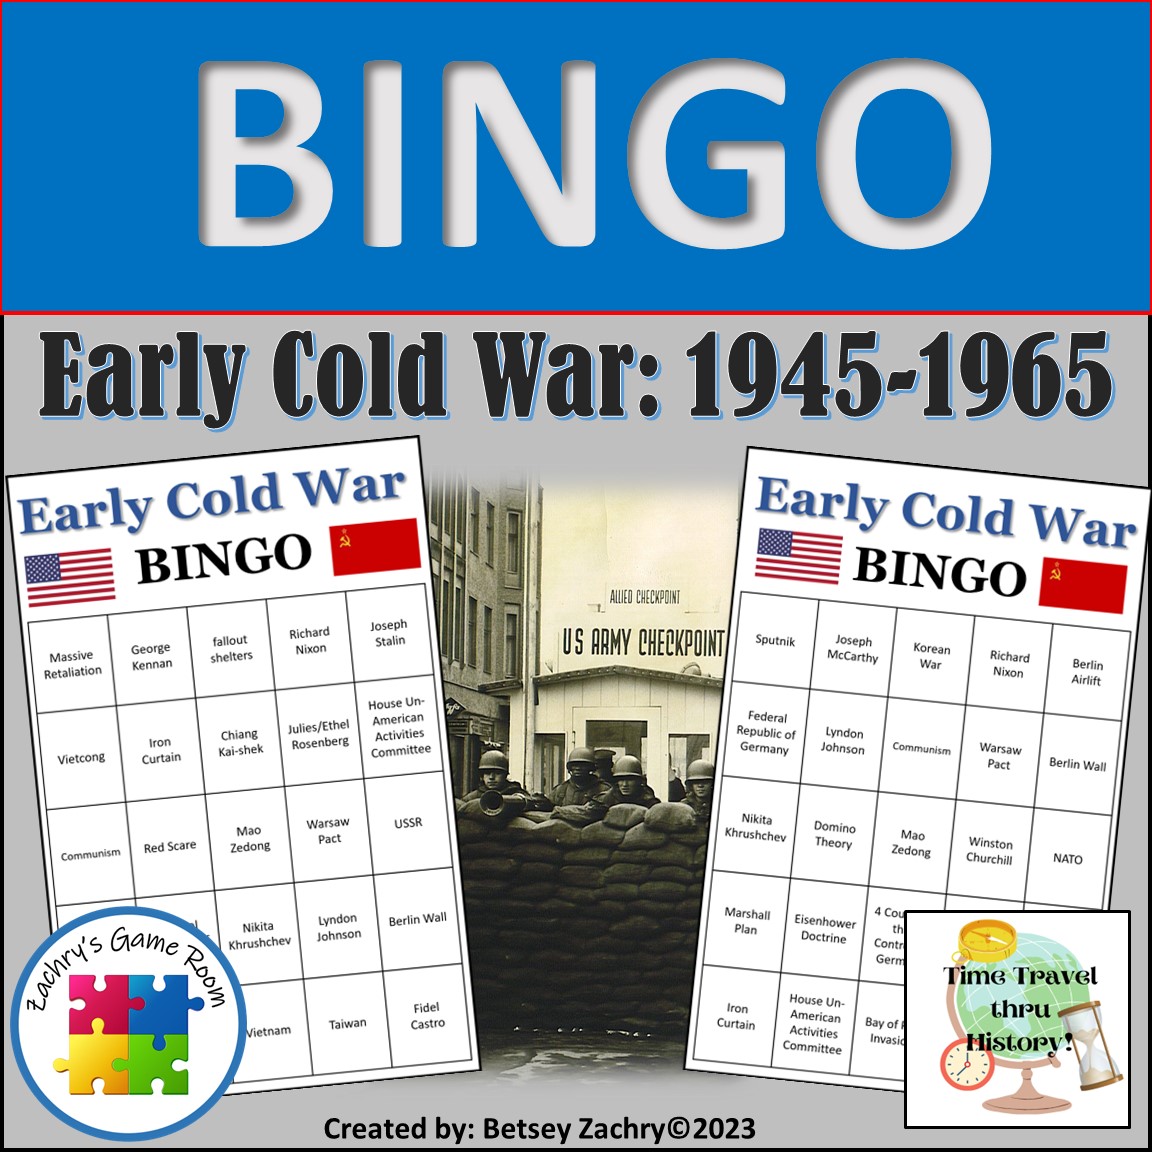 Early Cold War (1945-1965) BINGO Review Game Activity